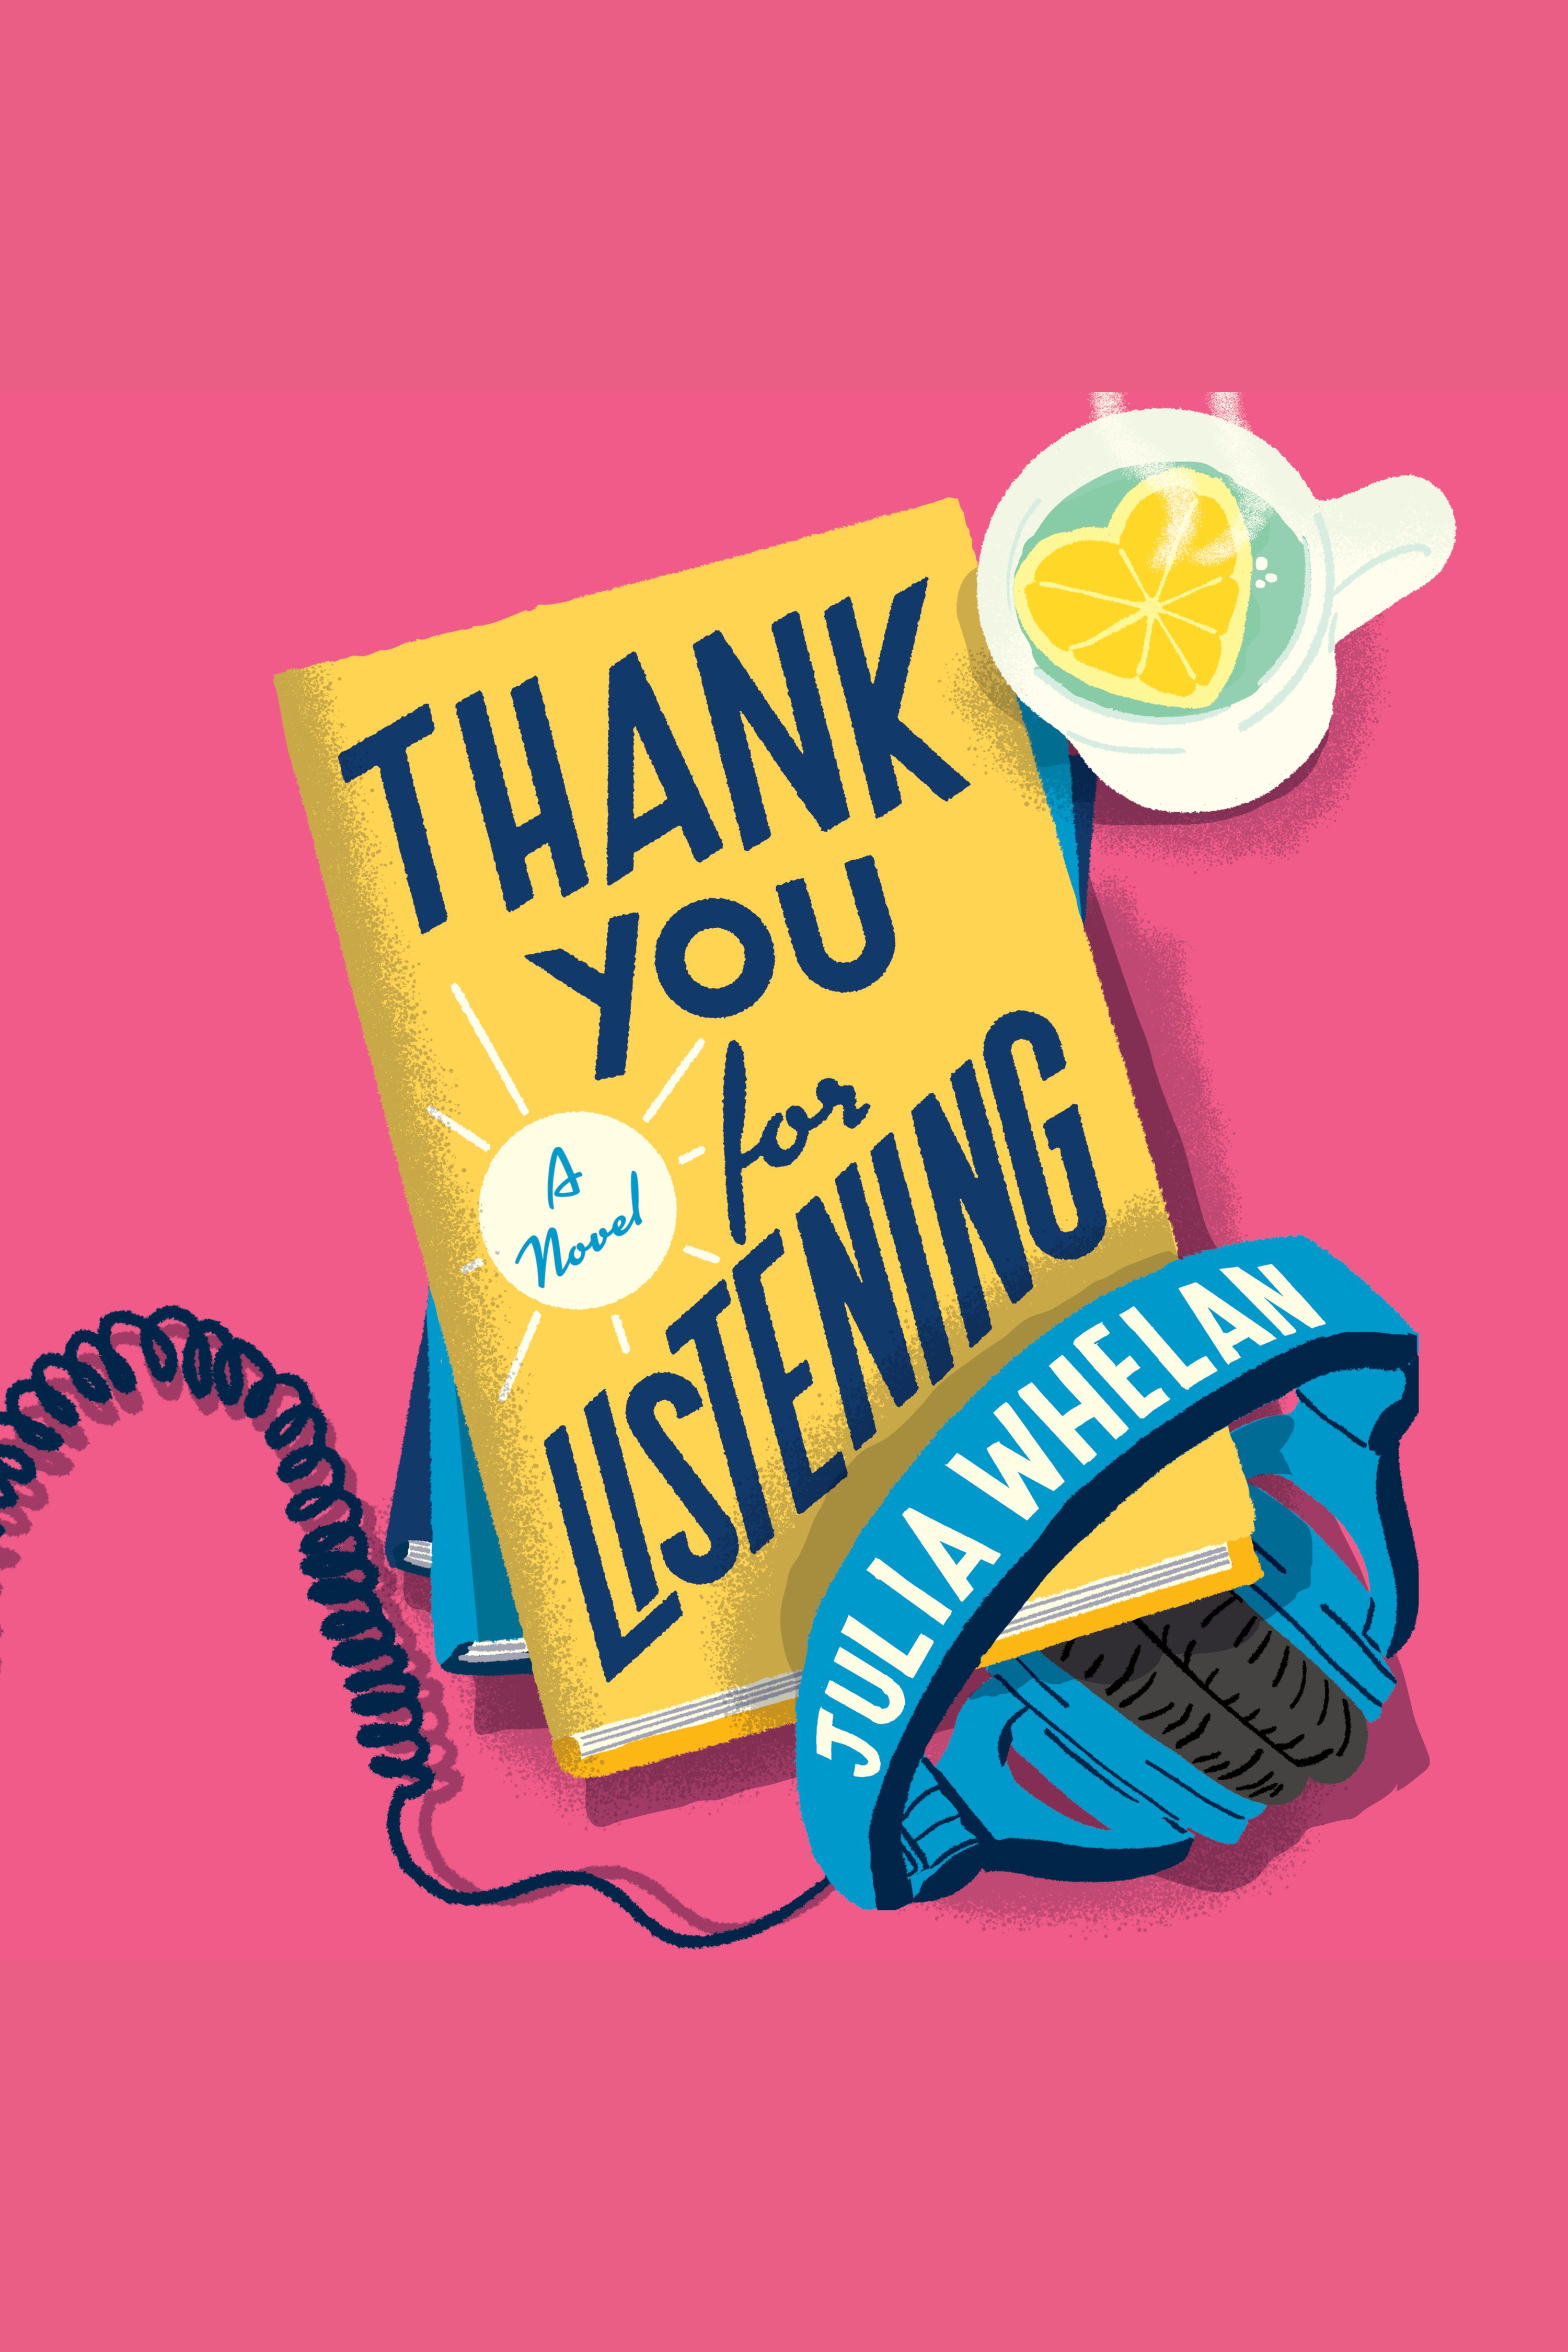 Thank You For Listening cover image